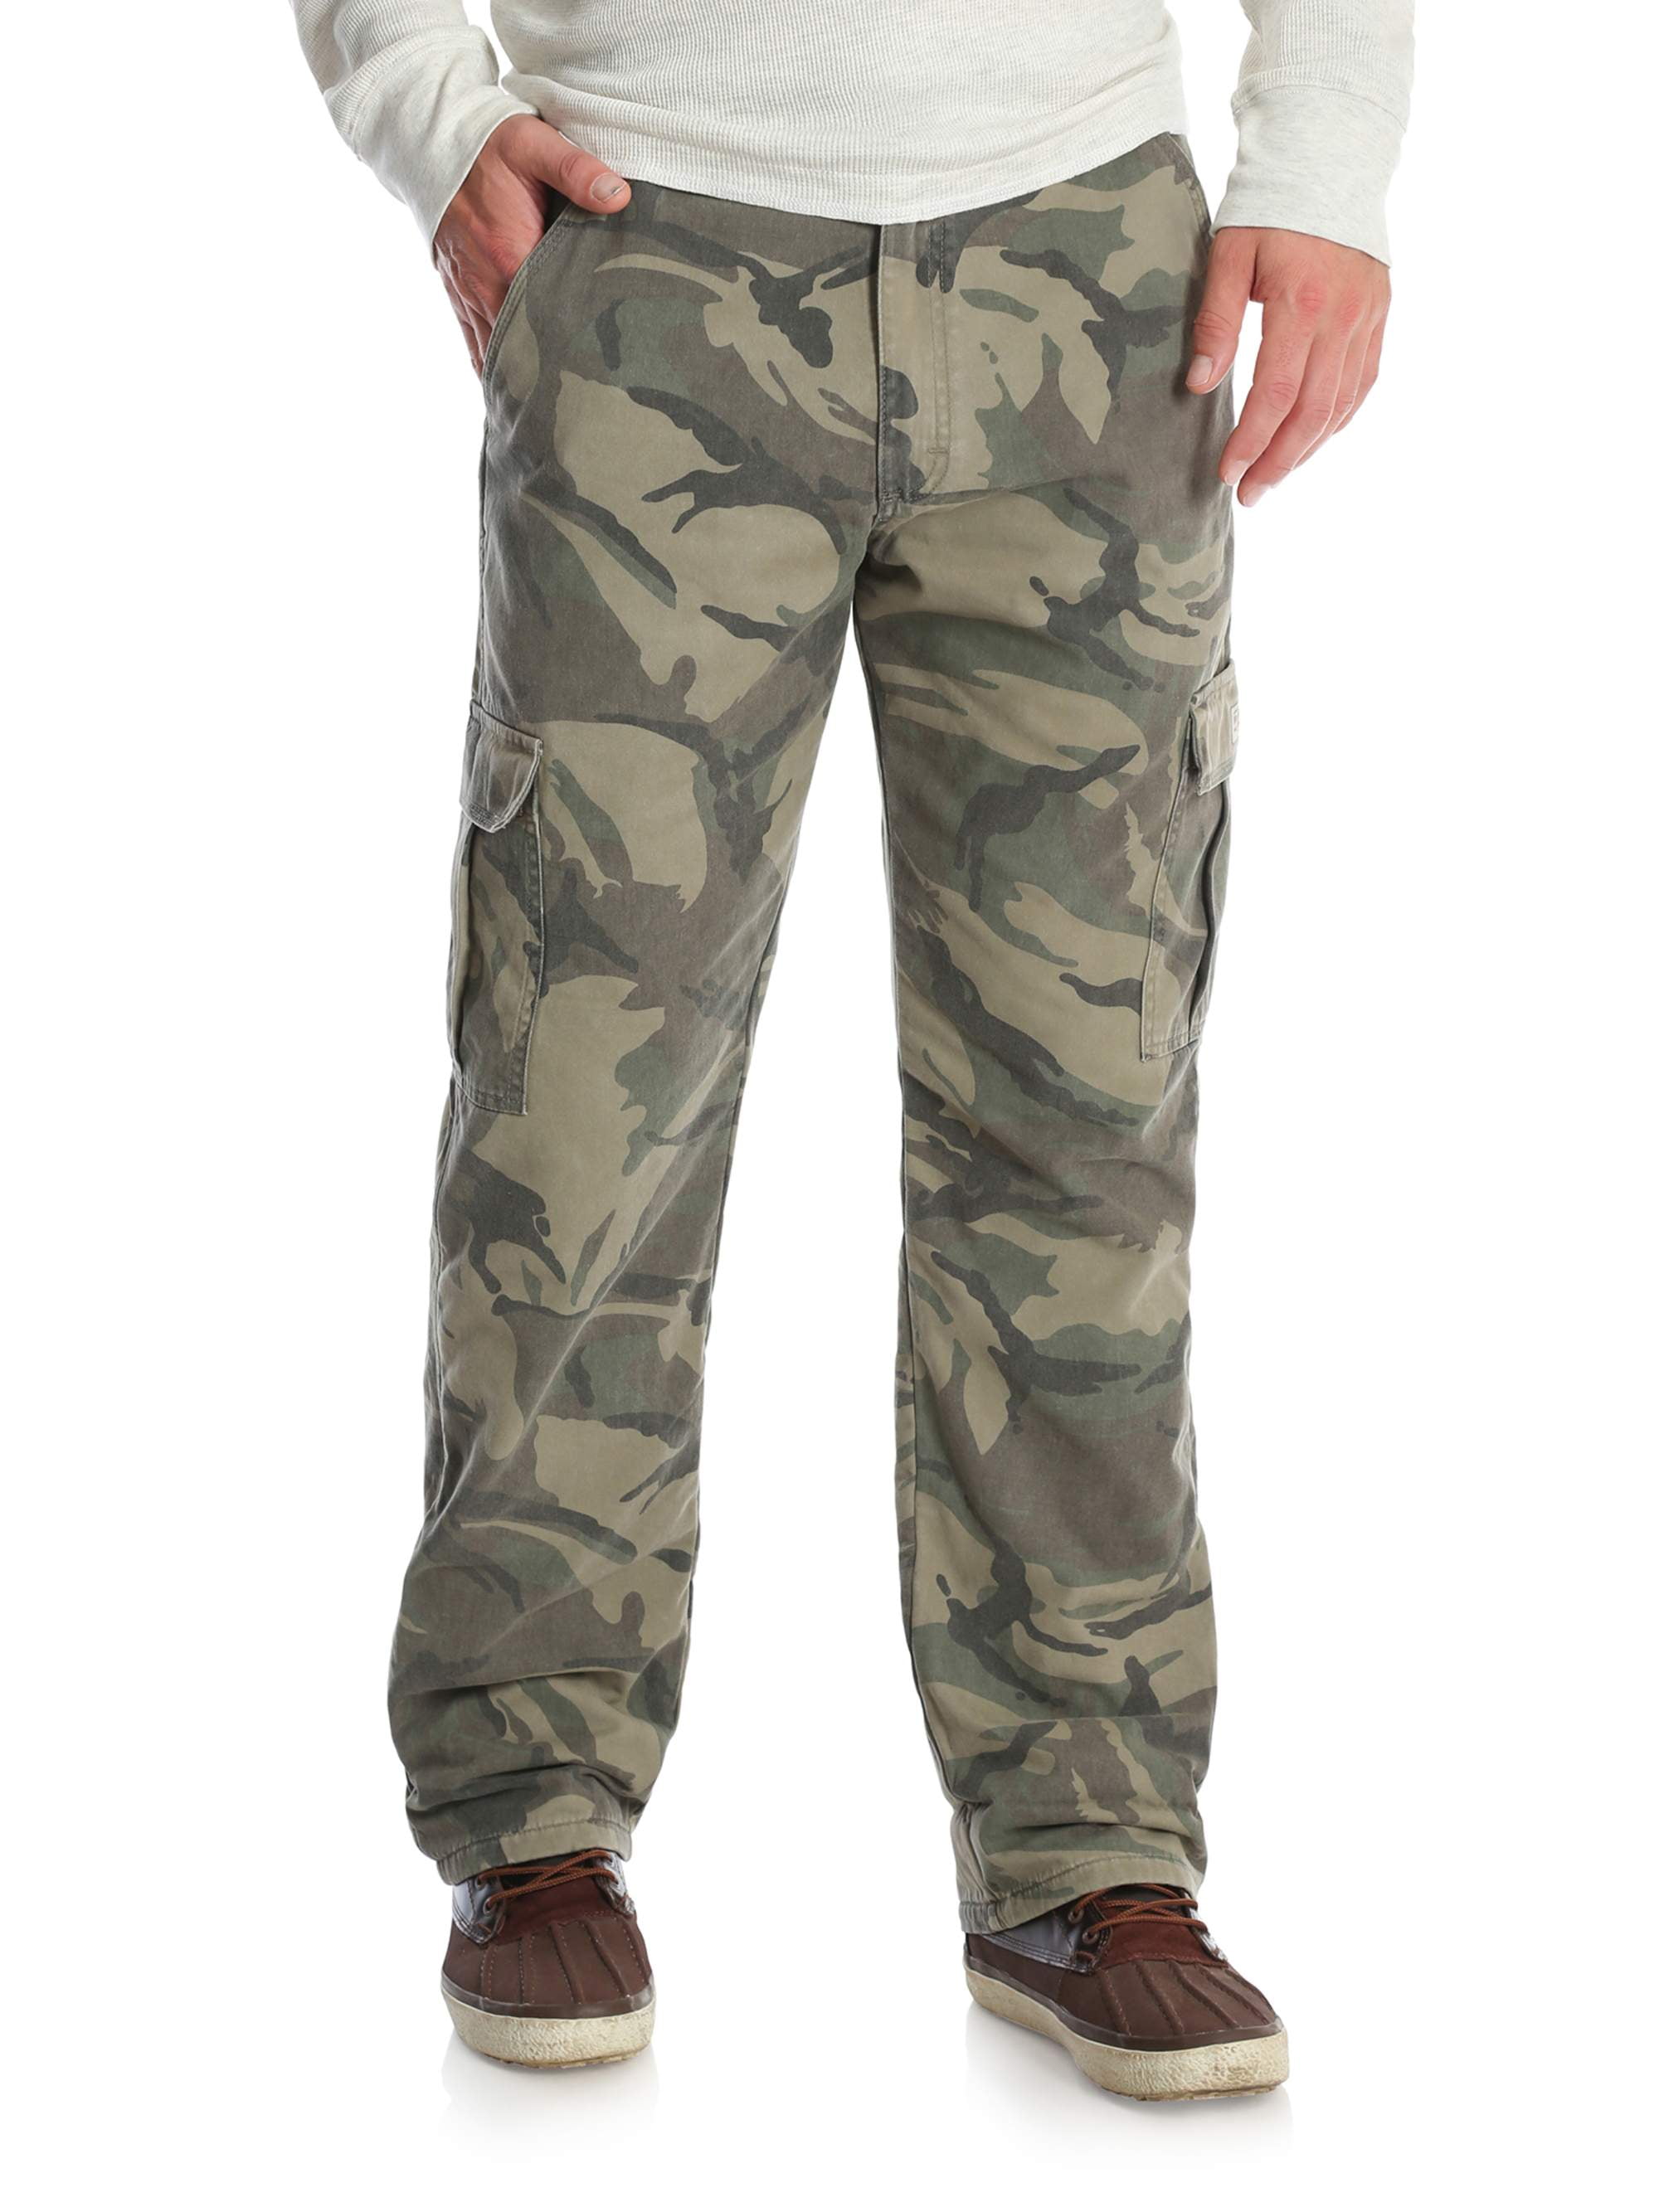 Men's Cargo Multi-pocket Pants Camouflage Fleeces Lined Thick Trousers Military 